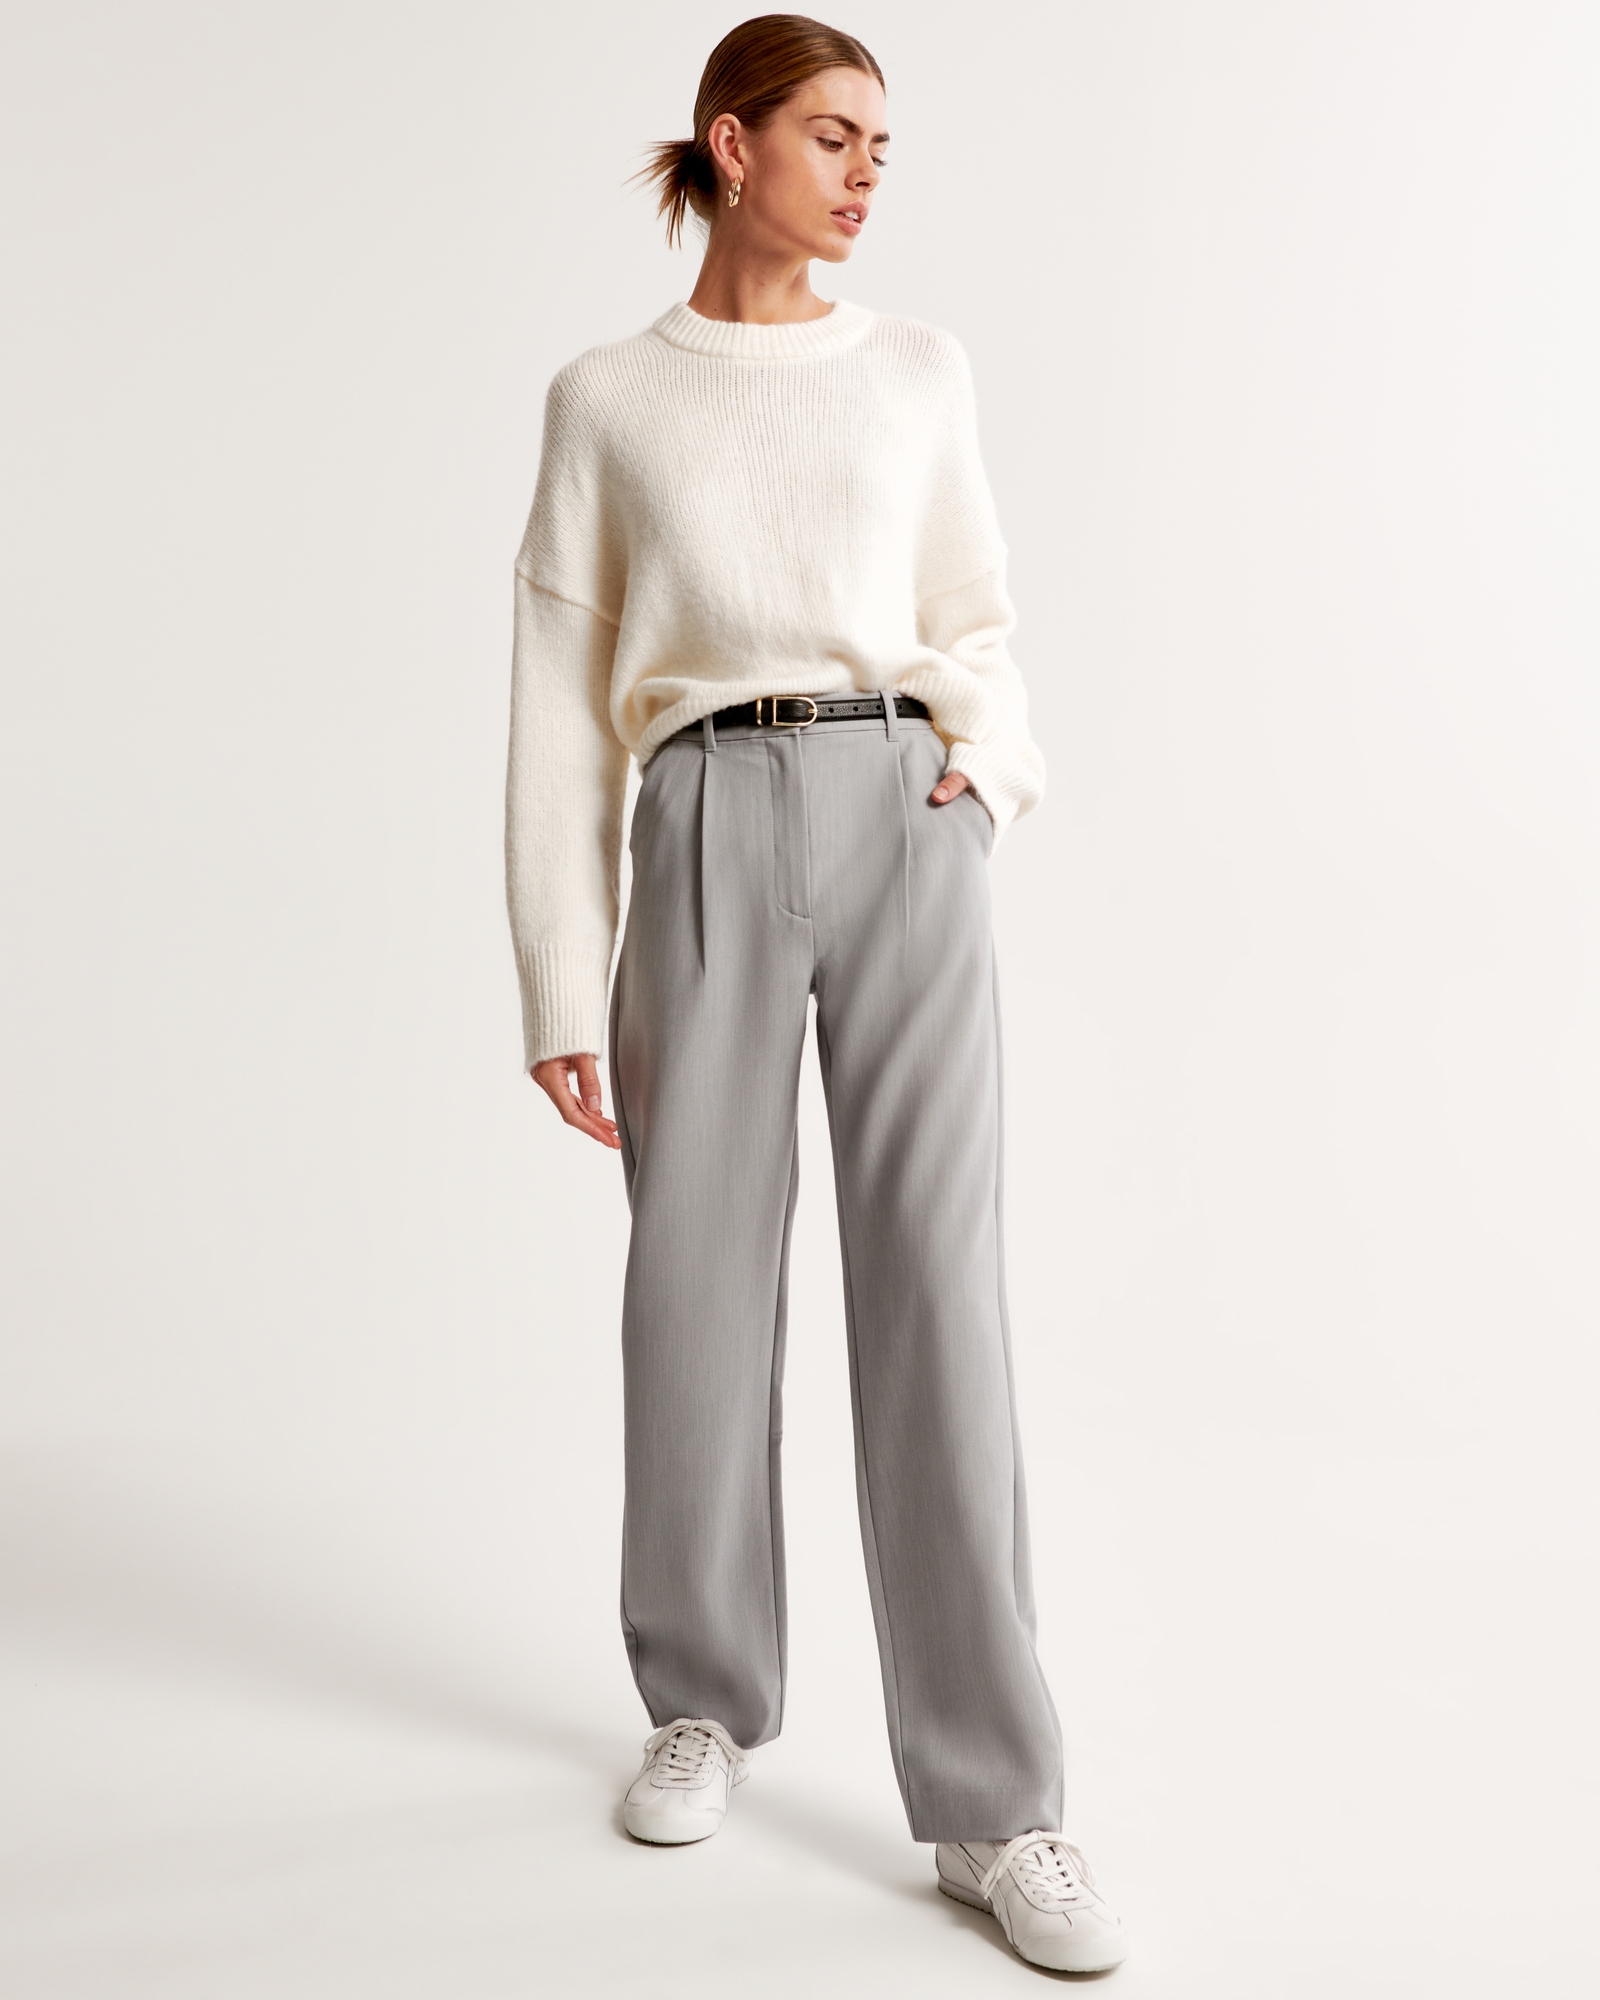 Women's Tailored Flare Pant, Women's Clearance